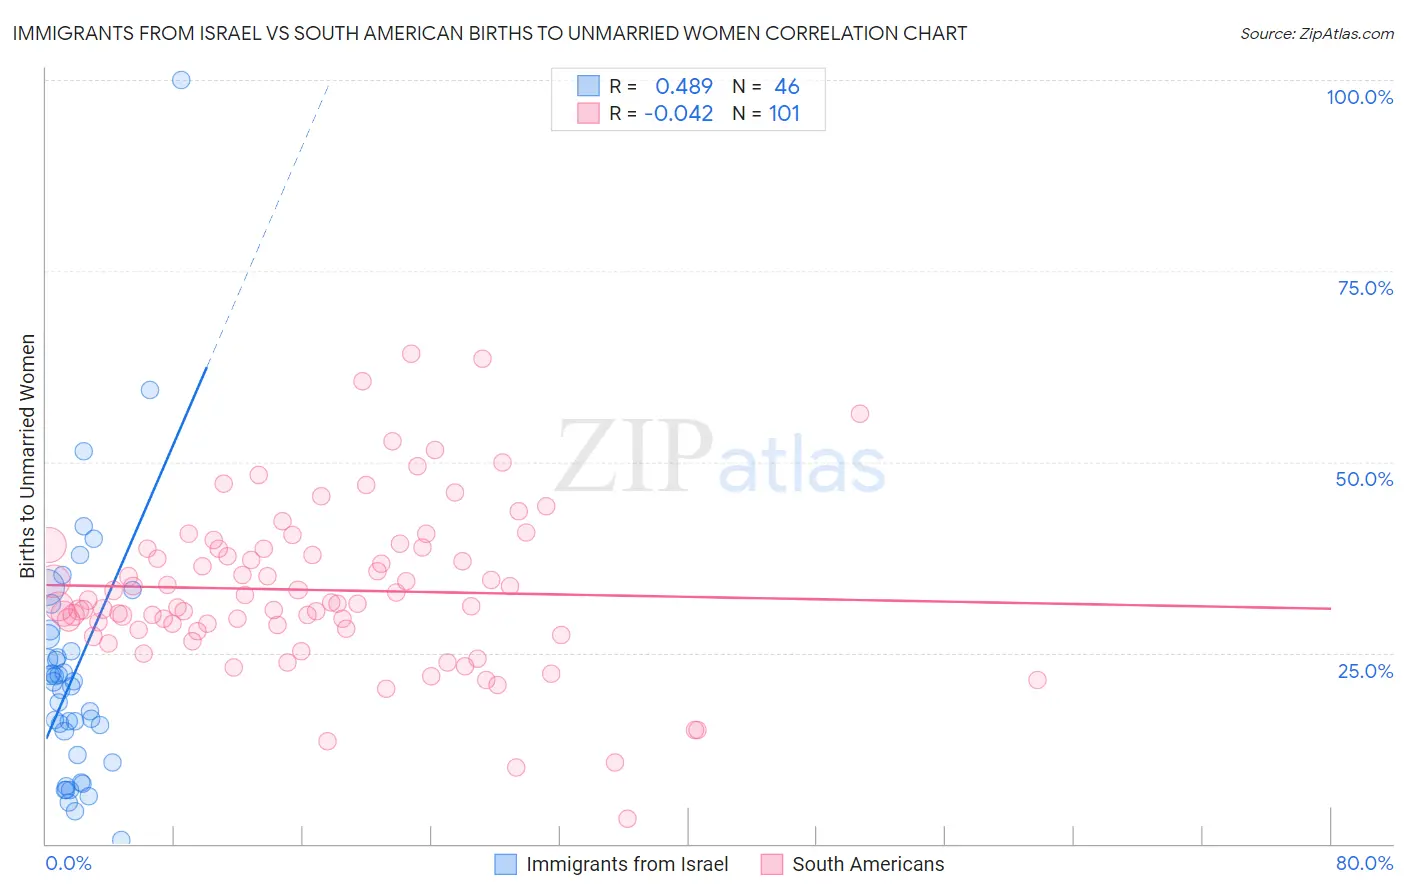 Immigrants from Israel vs South American Births to Unmarried Women